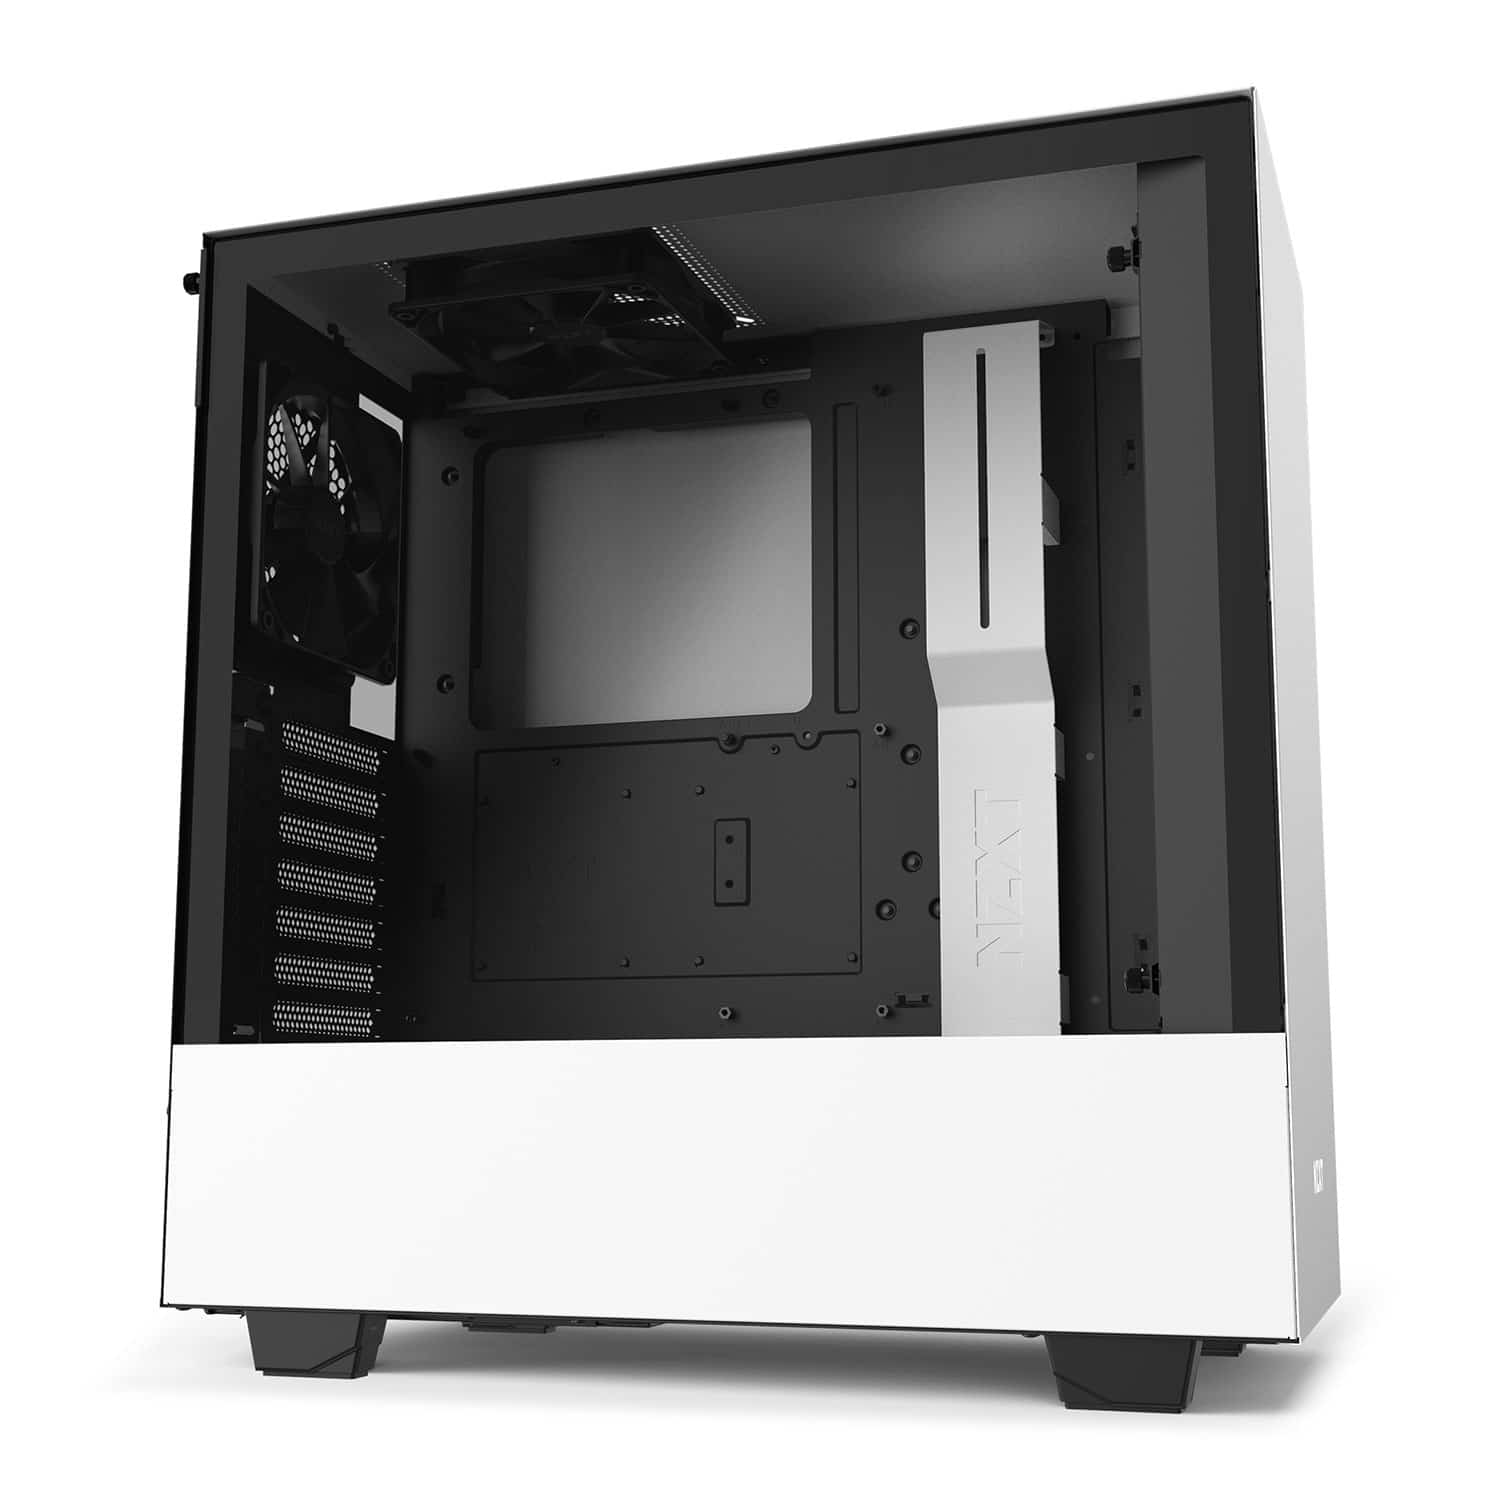 NZXT H510 Mid Tower Case